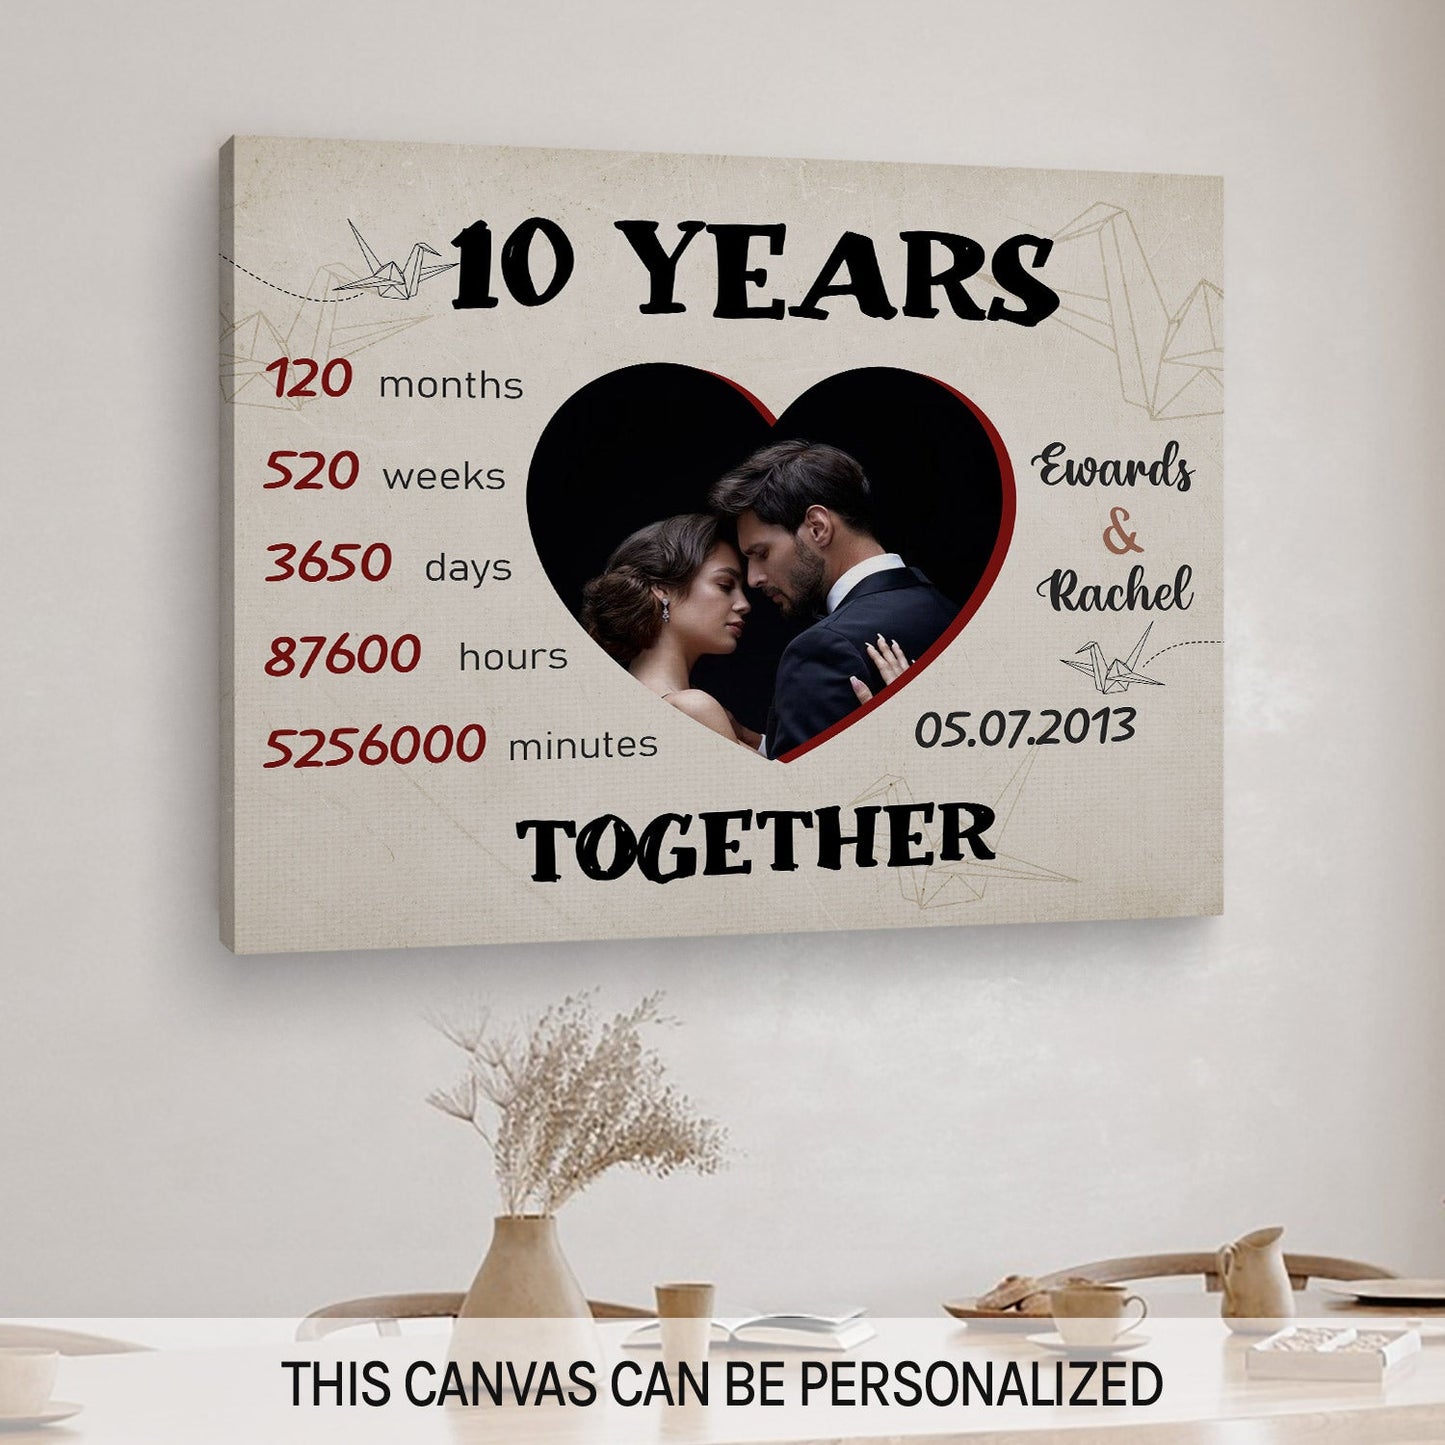 Personalized 10 Year Anniversary gift for him for her - 10 Years